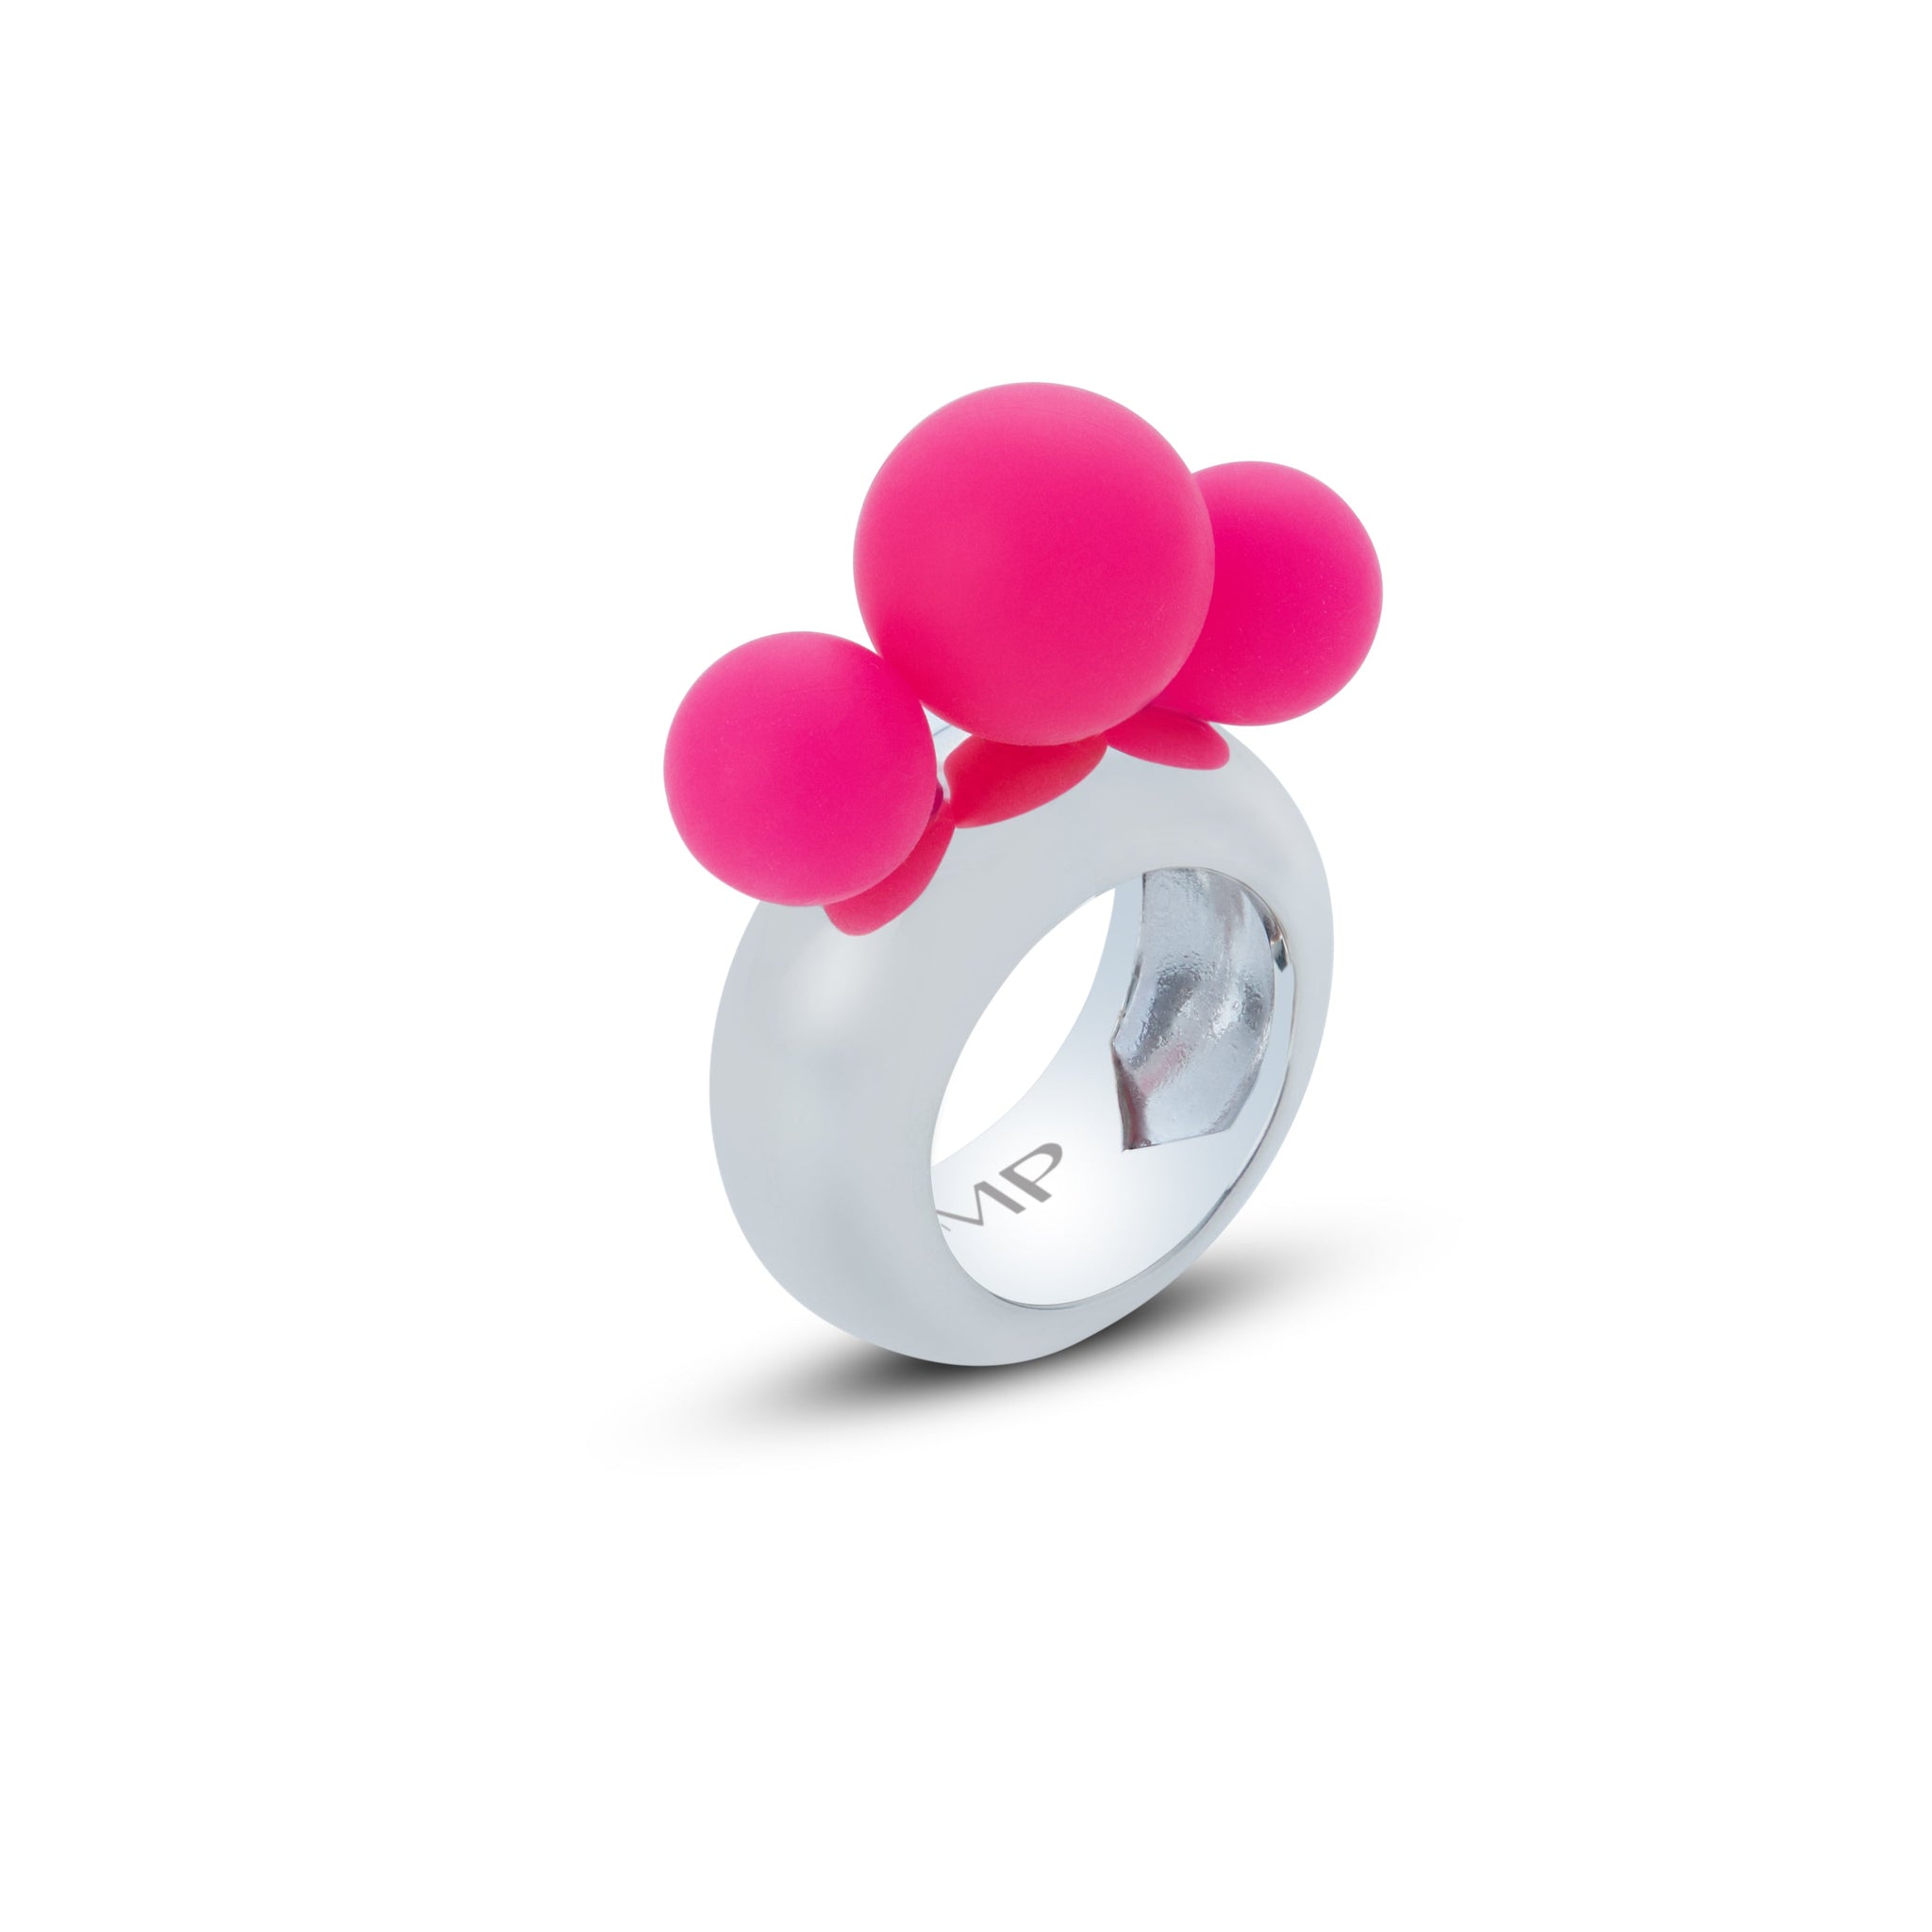 Madame Palm self-love trilogy in fuchsia silicone pearls and white gold 18kt band